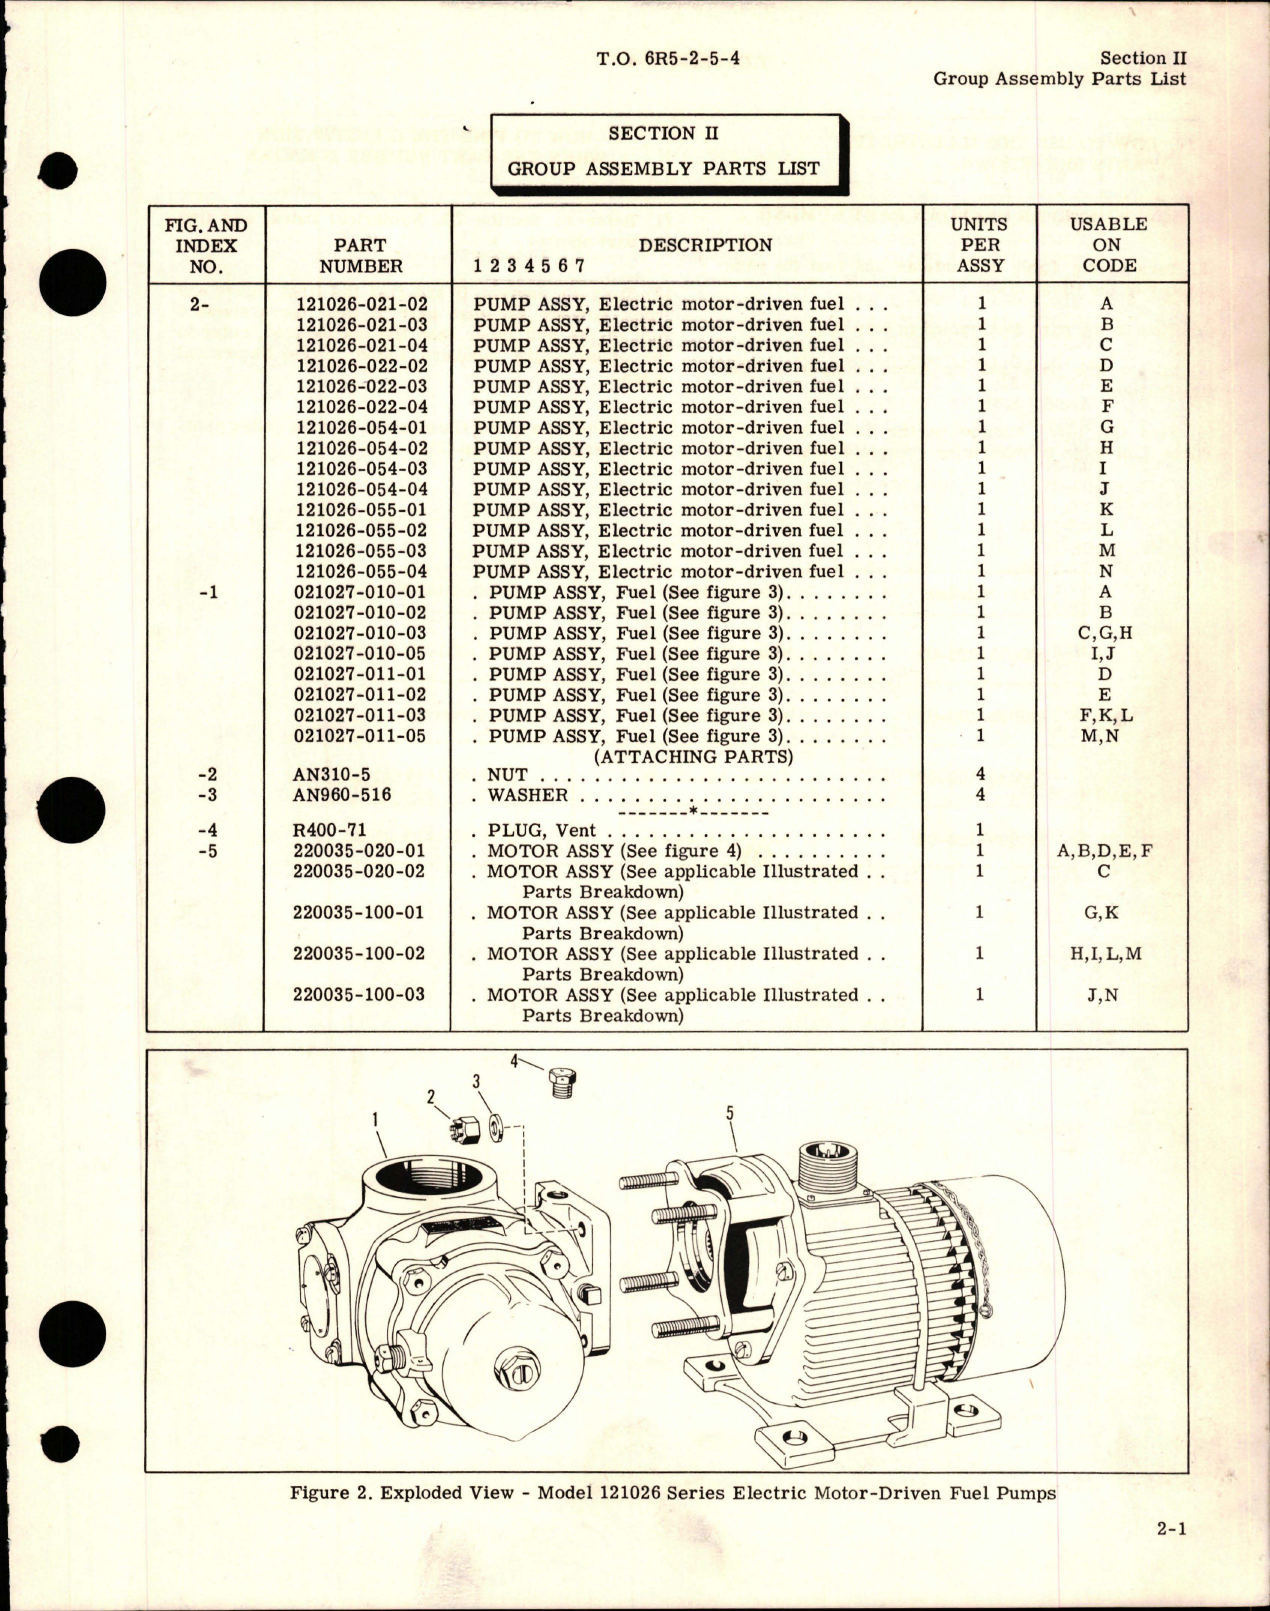 Sample page 7 from AirCorps Library document: Illustrated Parts Breakdown for Electric Motor Driven Fuel Pumps